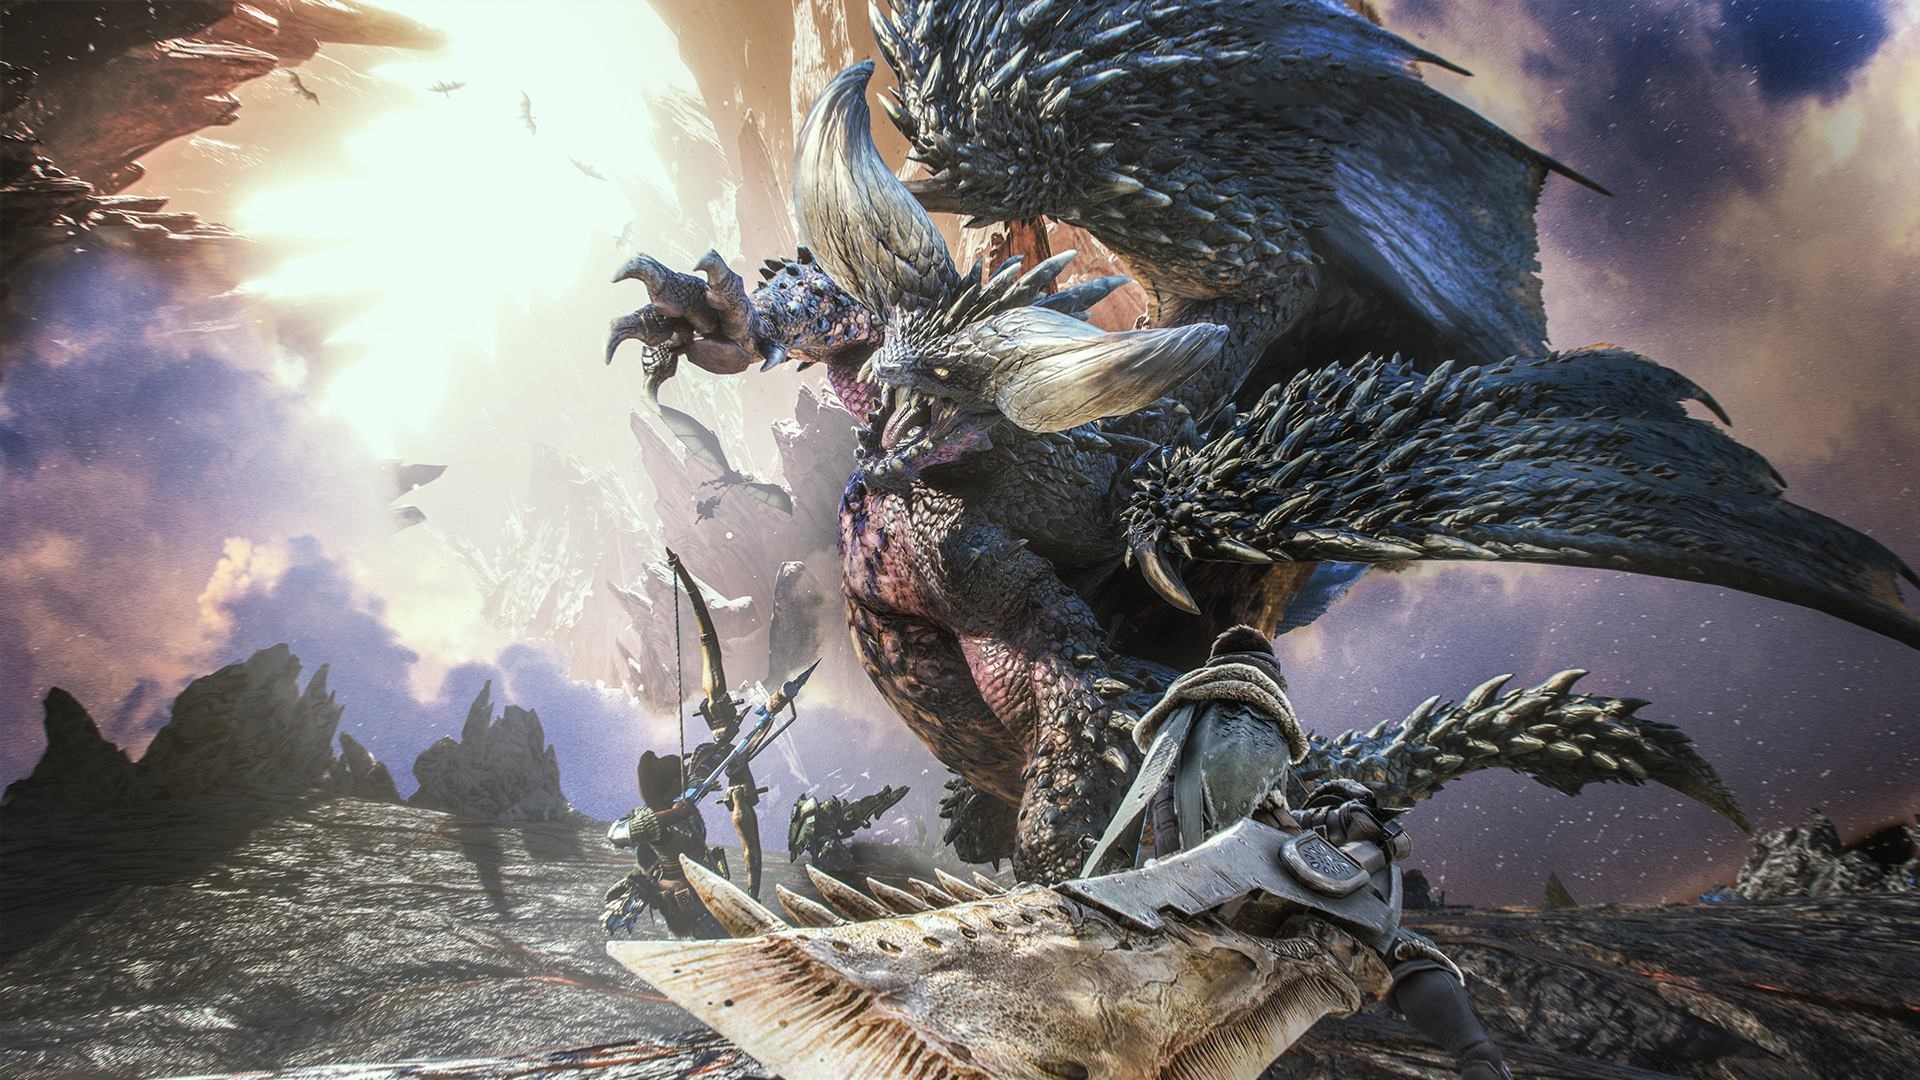 Monster Hunter movie officially confirmed by Capcom